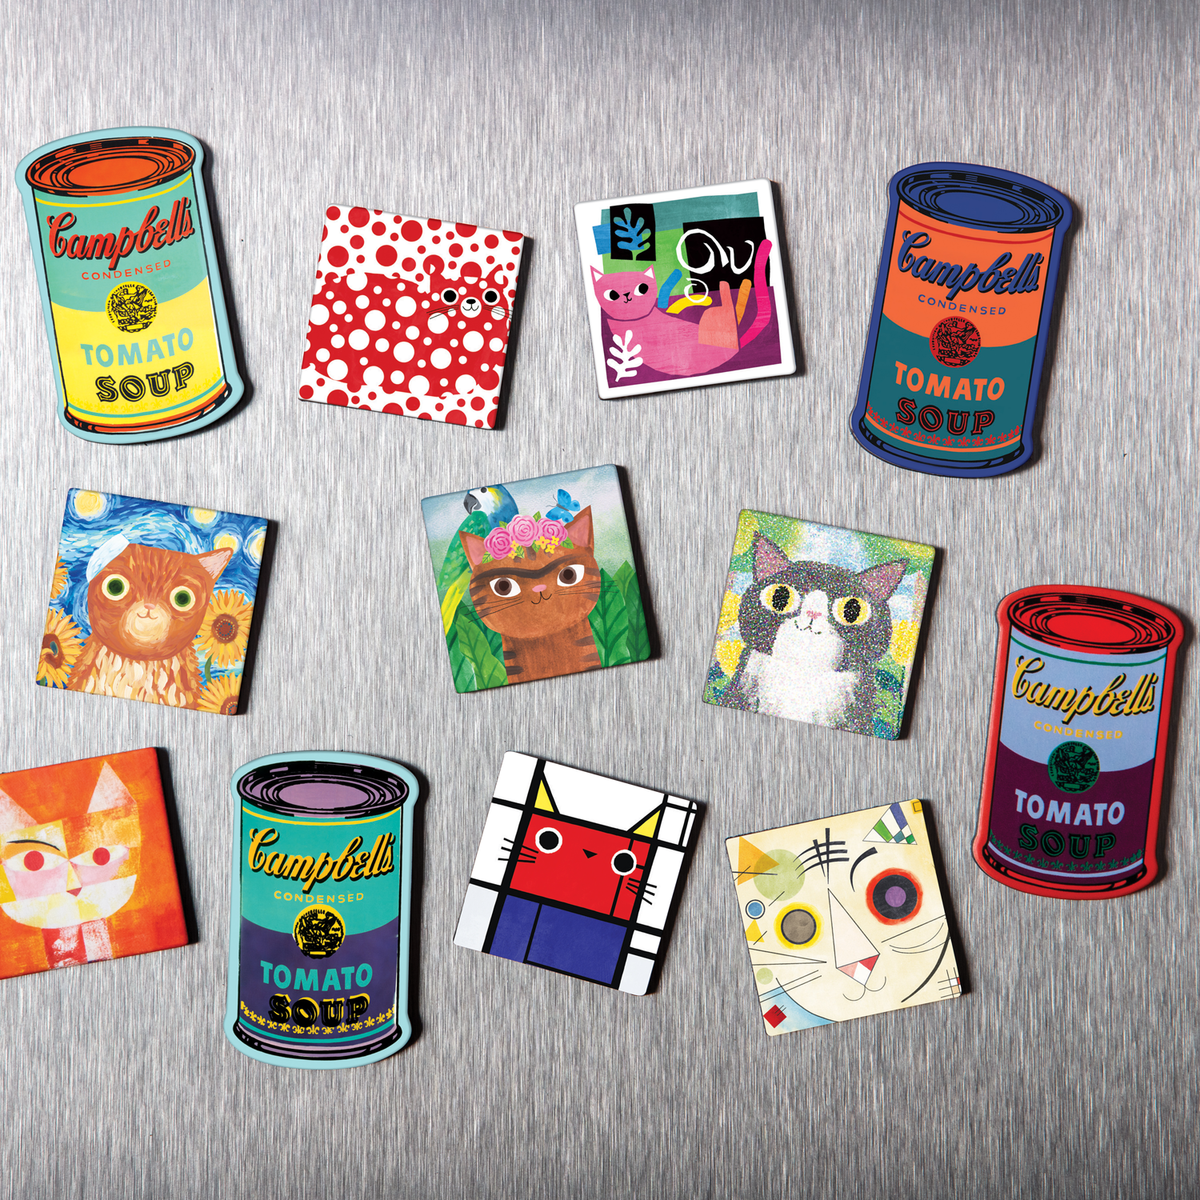 Andy Warhol Soup Can Magnet Set